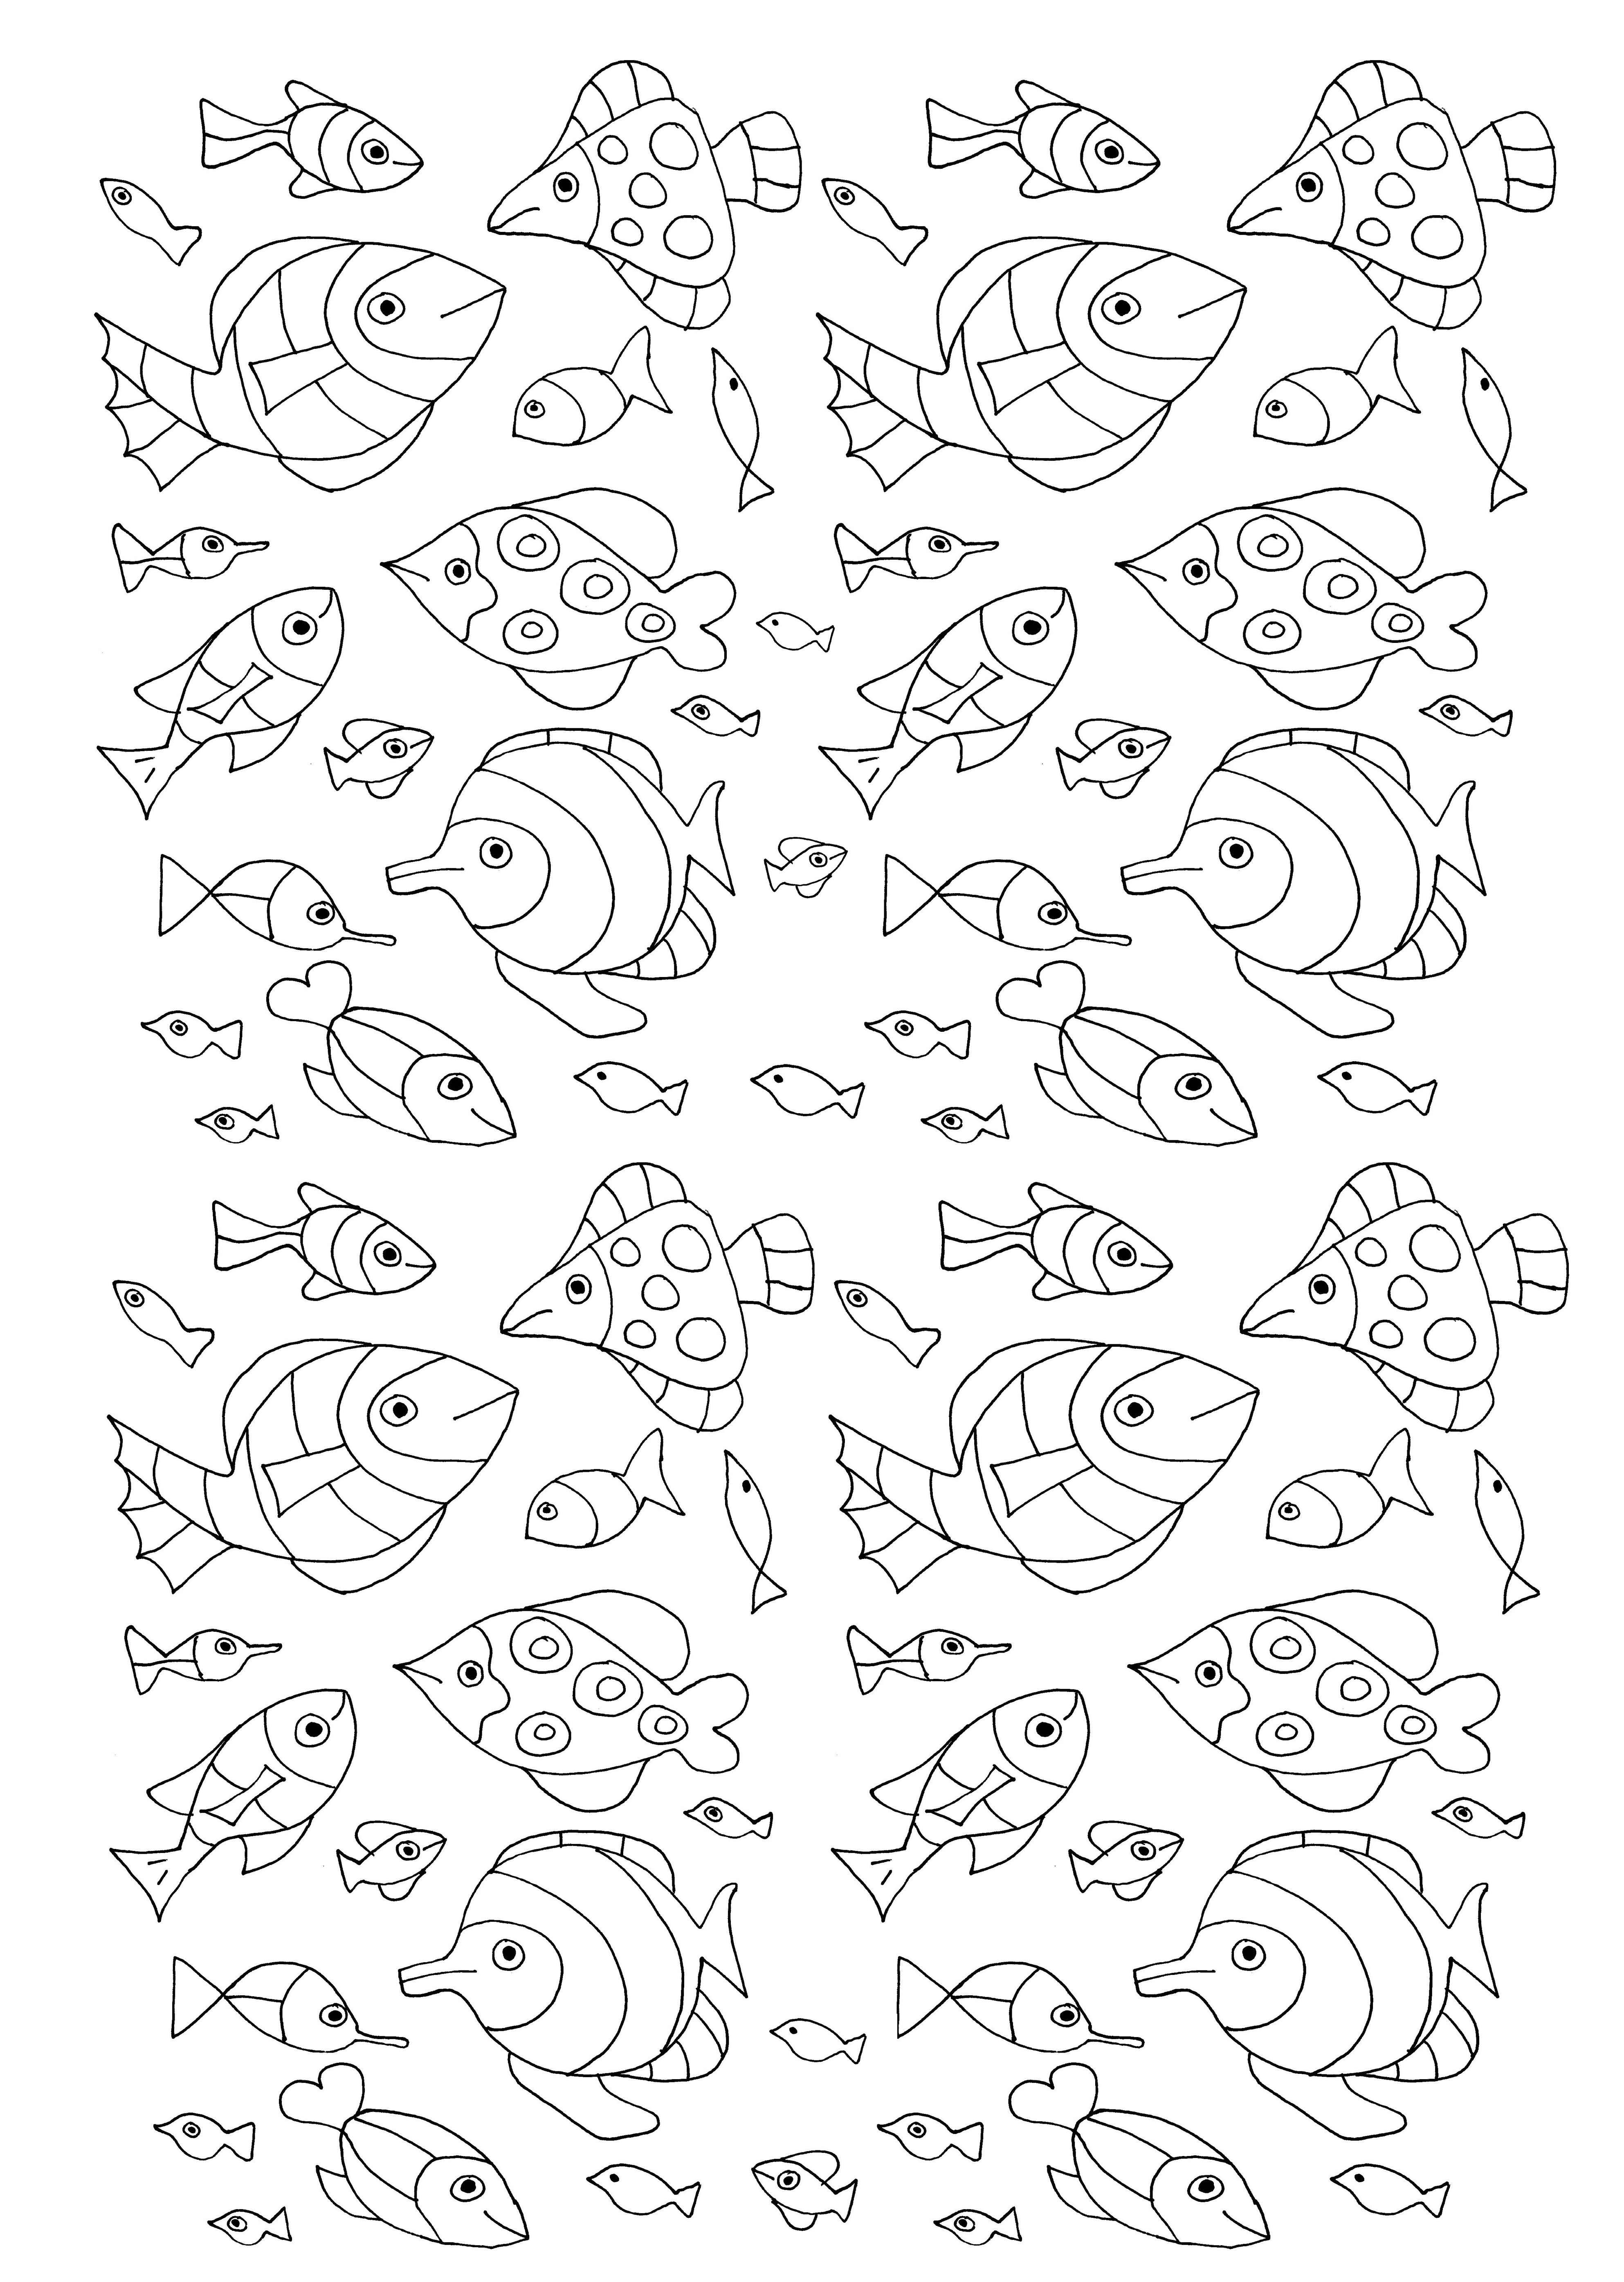 Numerous fish - Water worlds Adult Coloring Pages